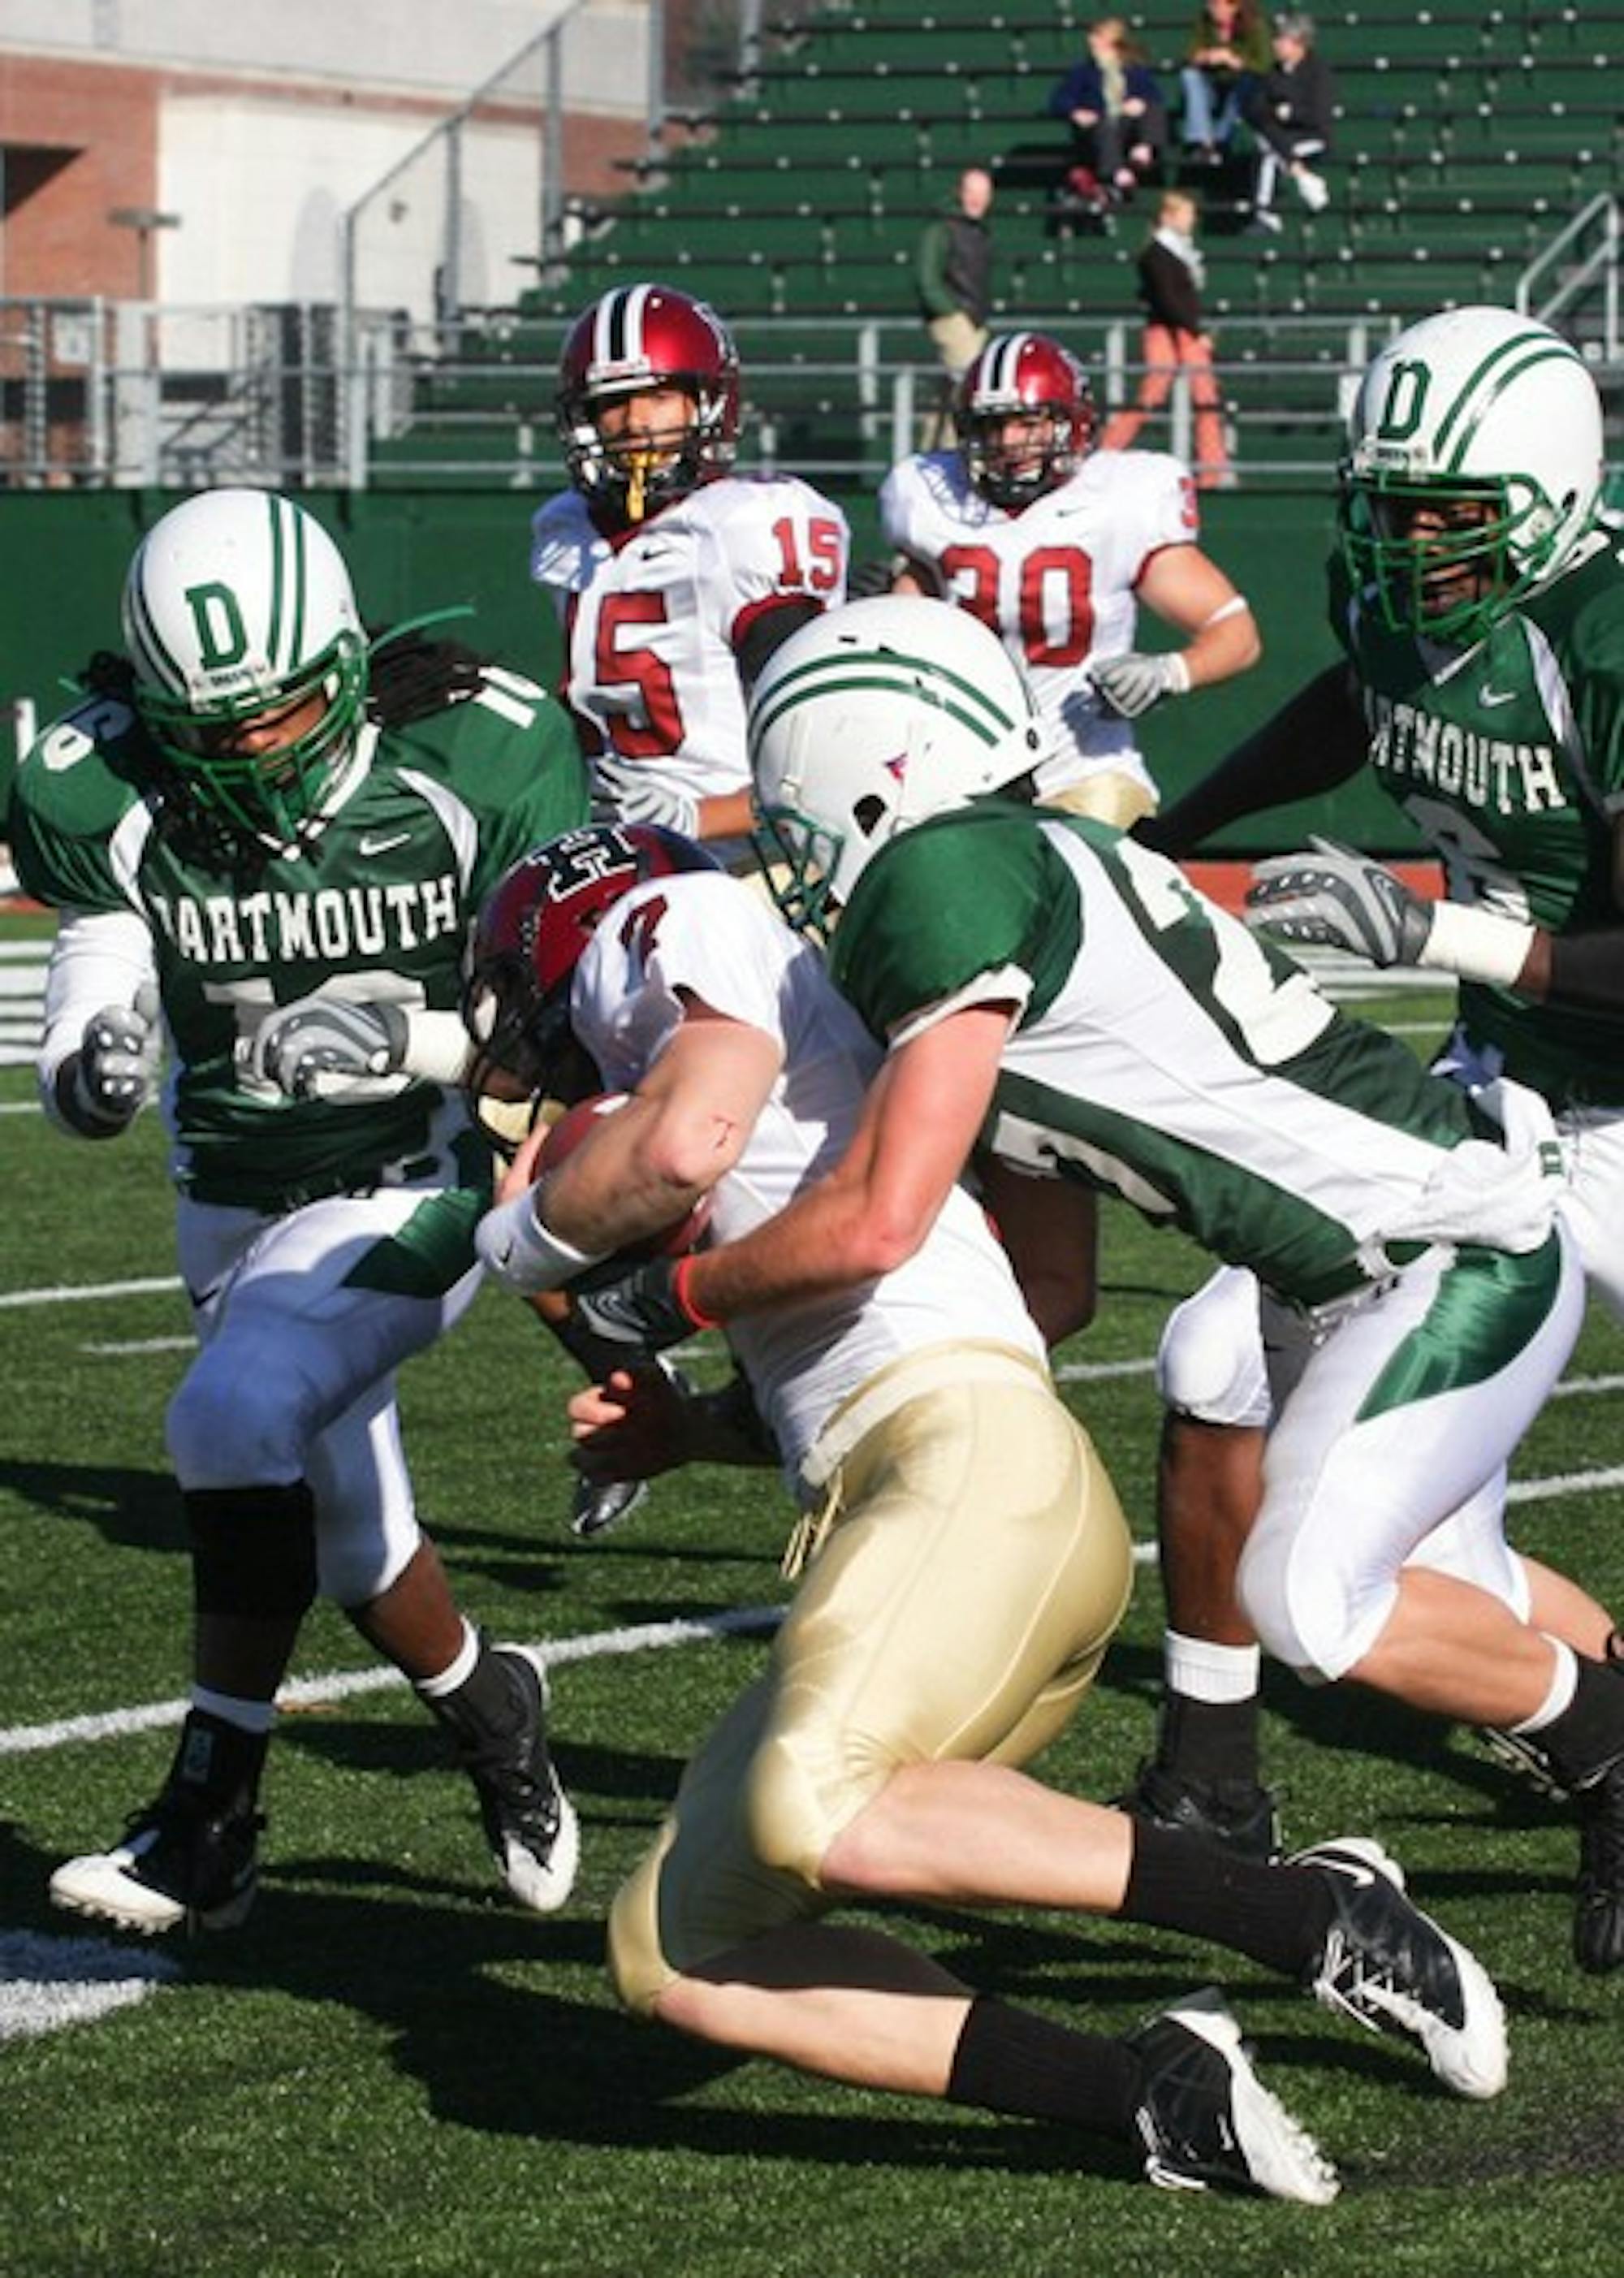 Dartmouth will have to contend with a high-powered Cornell offense that is near the top of the Ivy League in passing yards and total offensive yards.